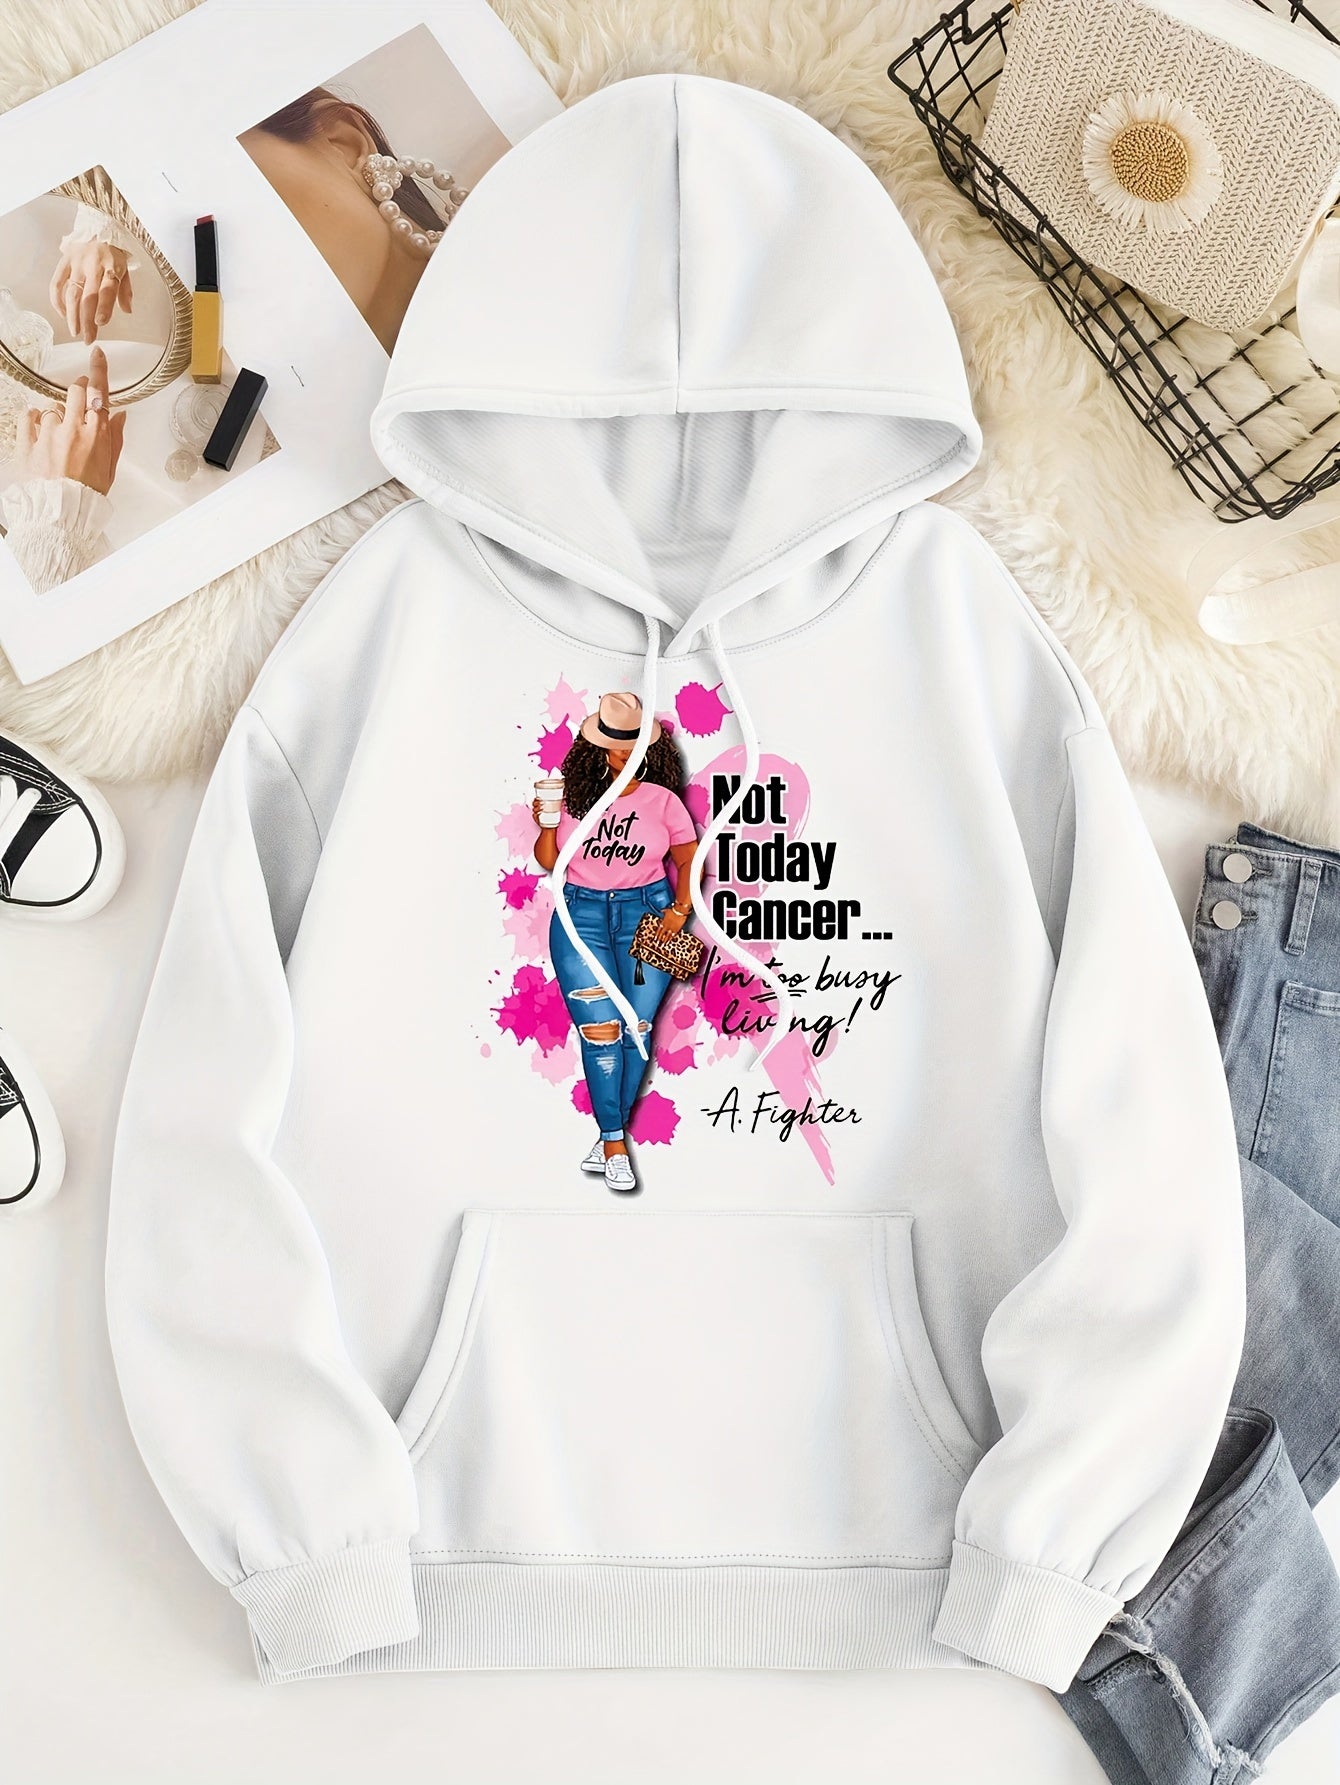 Not Today Cancer I'm Too Busy Living Women's Christian Pullover Hooded Sweatshirt claimedbygoddesigns